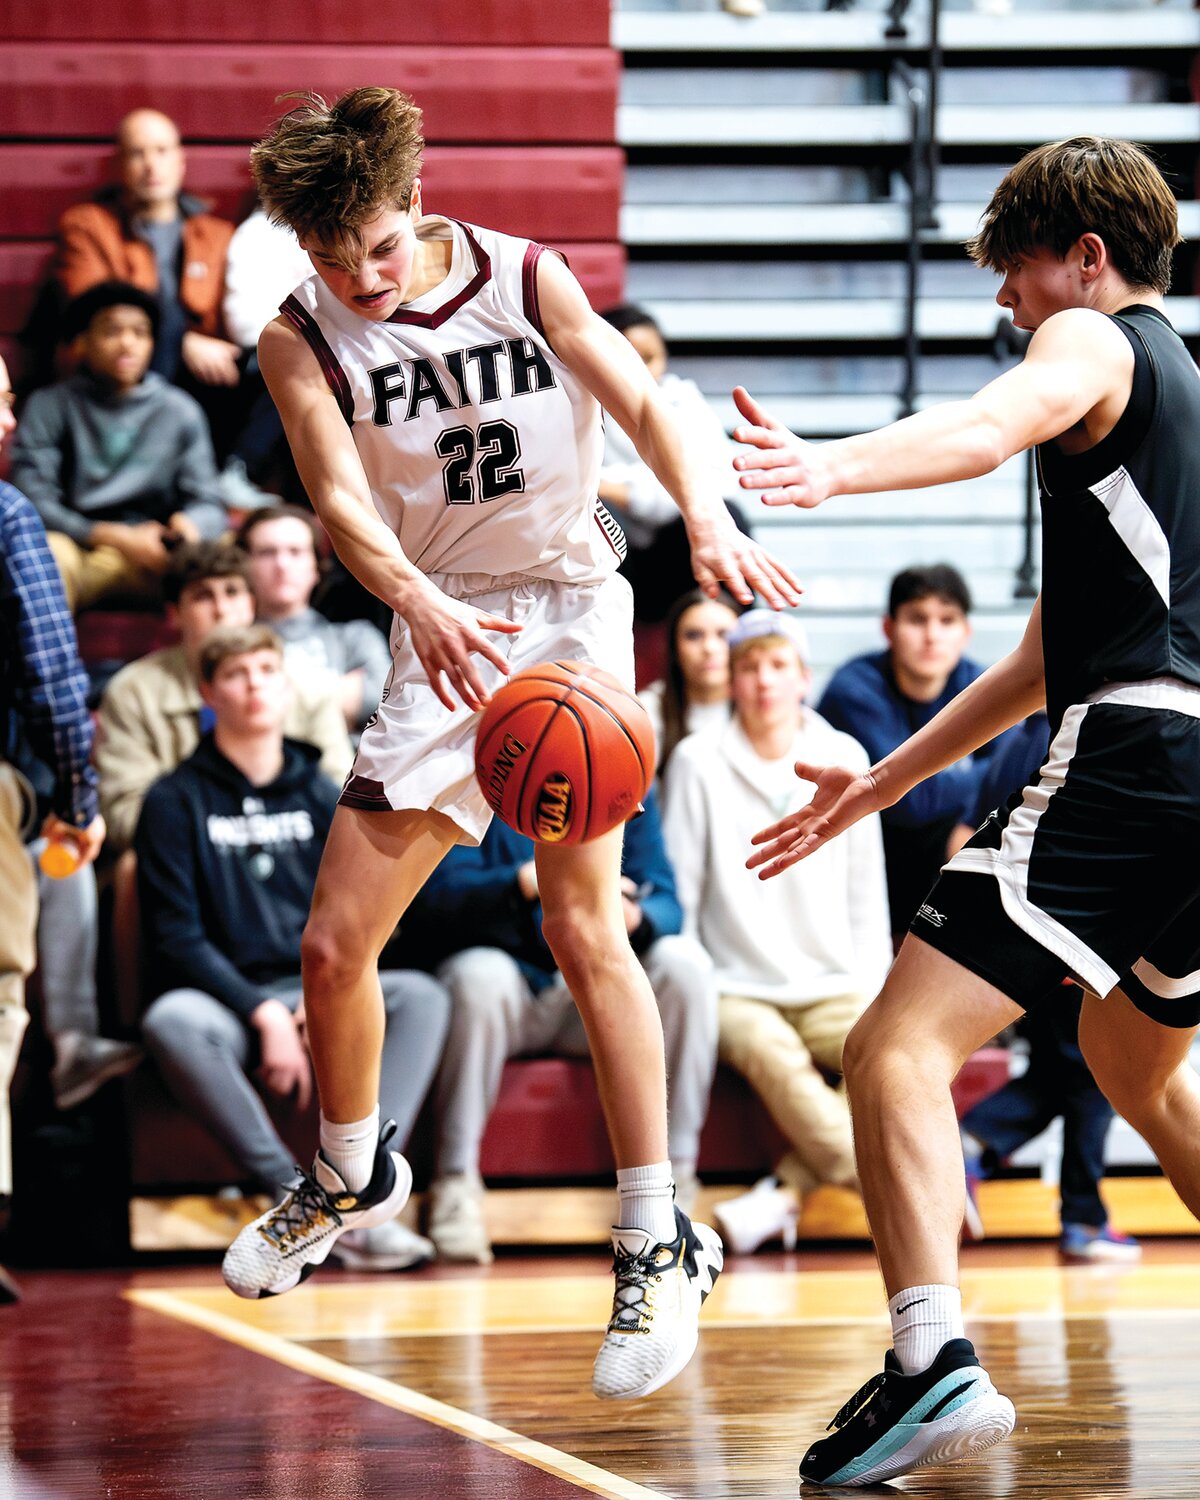 Faith Christian’s Jagger Verbit tries to spike the ball against Delco Christian’s Caleb Jameson in the second half.